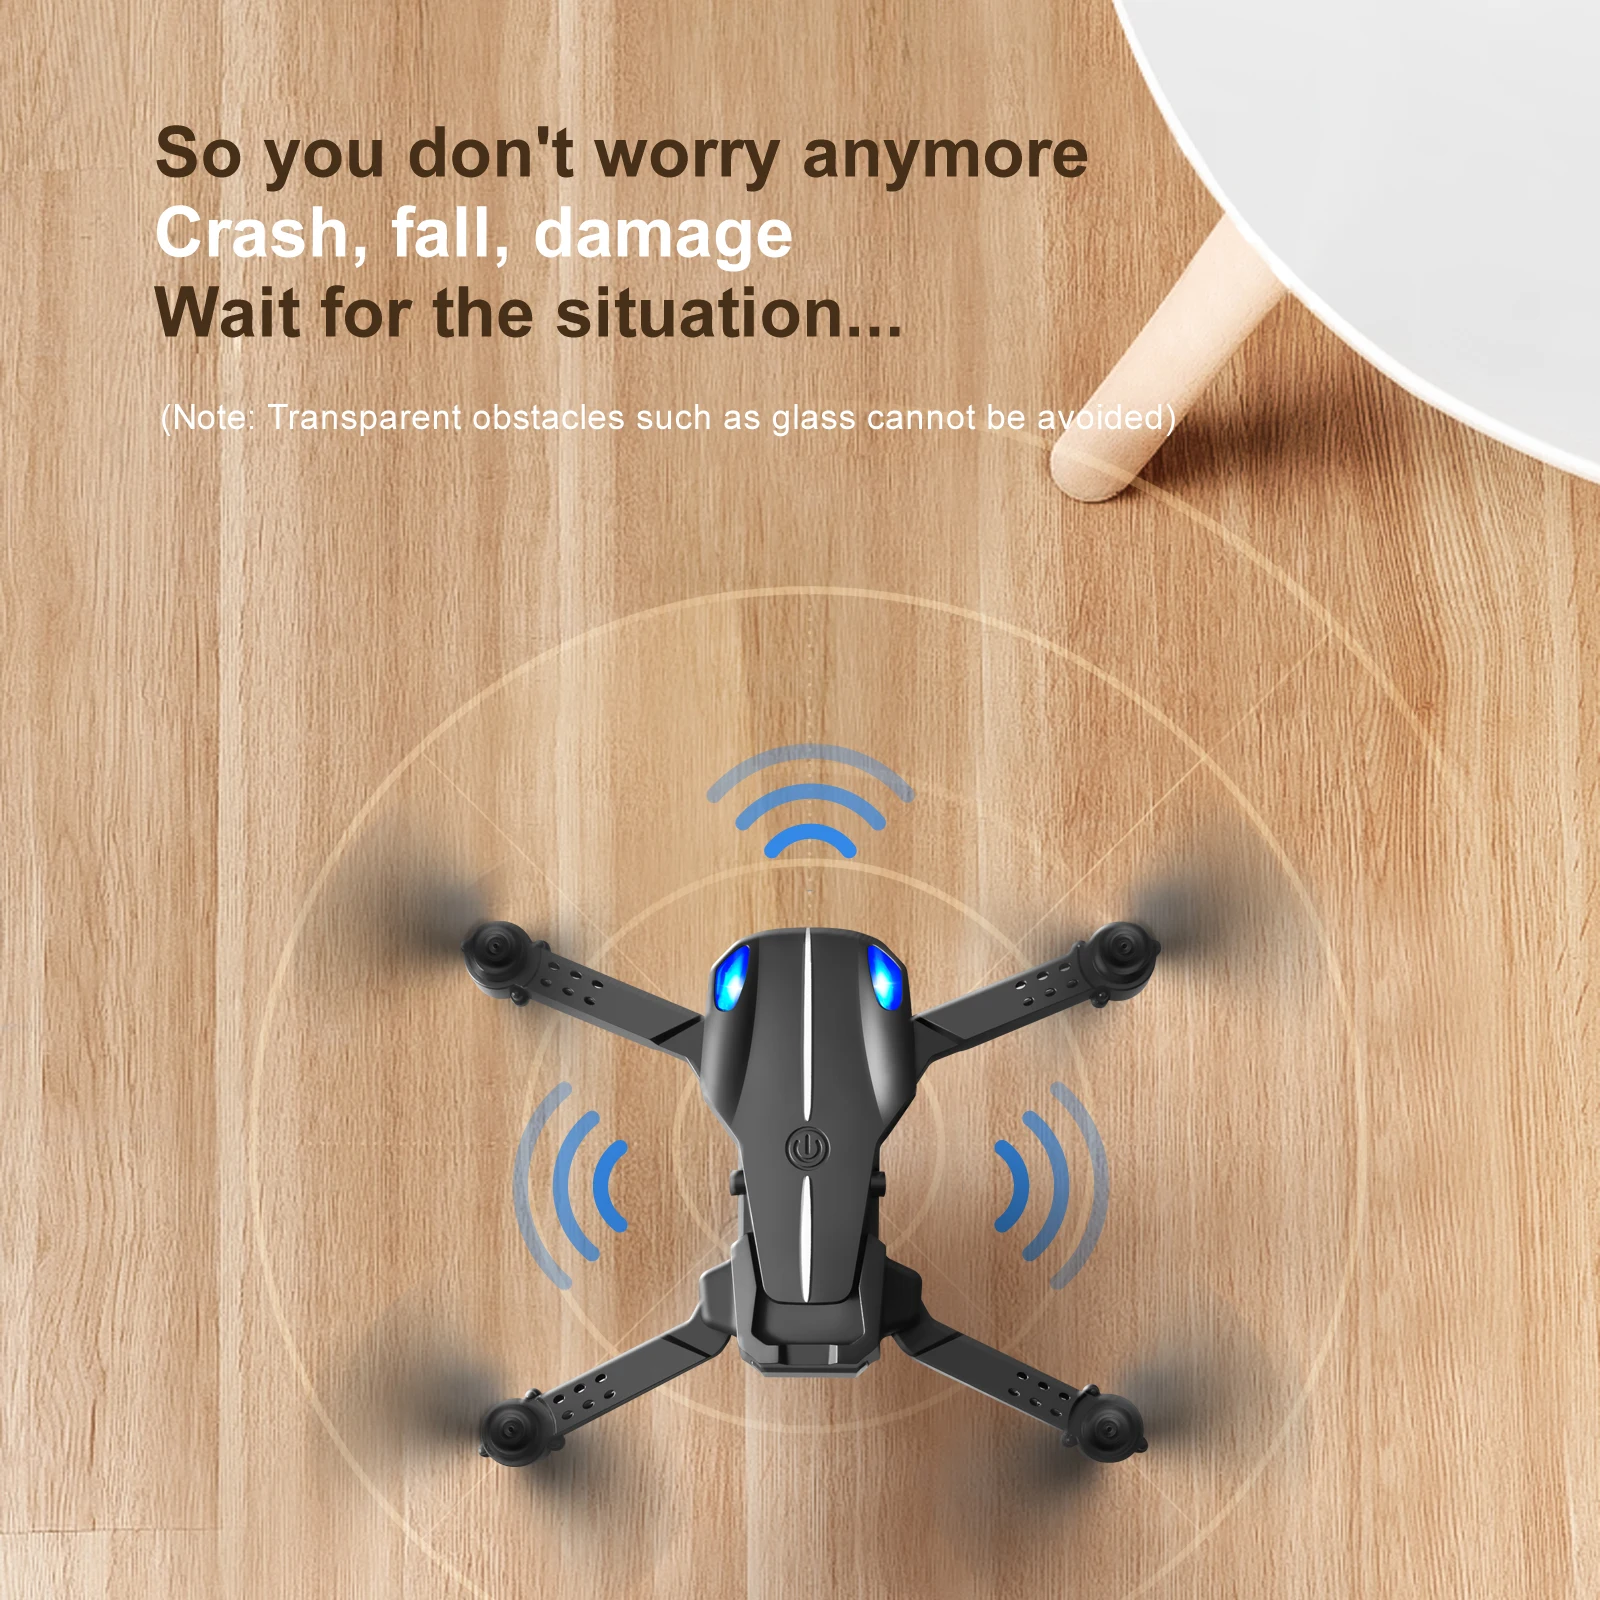 KY907 PRO Drone, so you don't worry anymore crash, fall, damage wait for